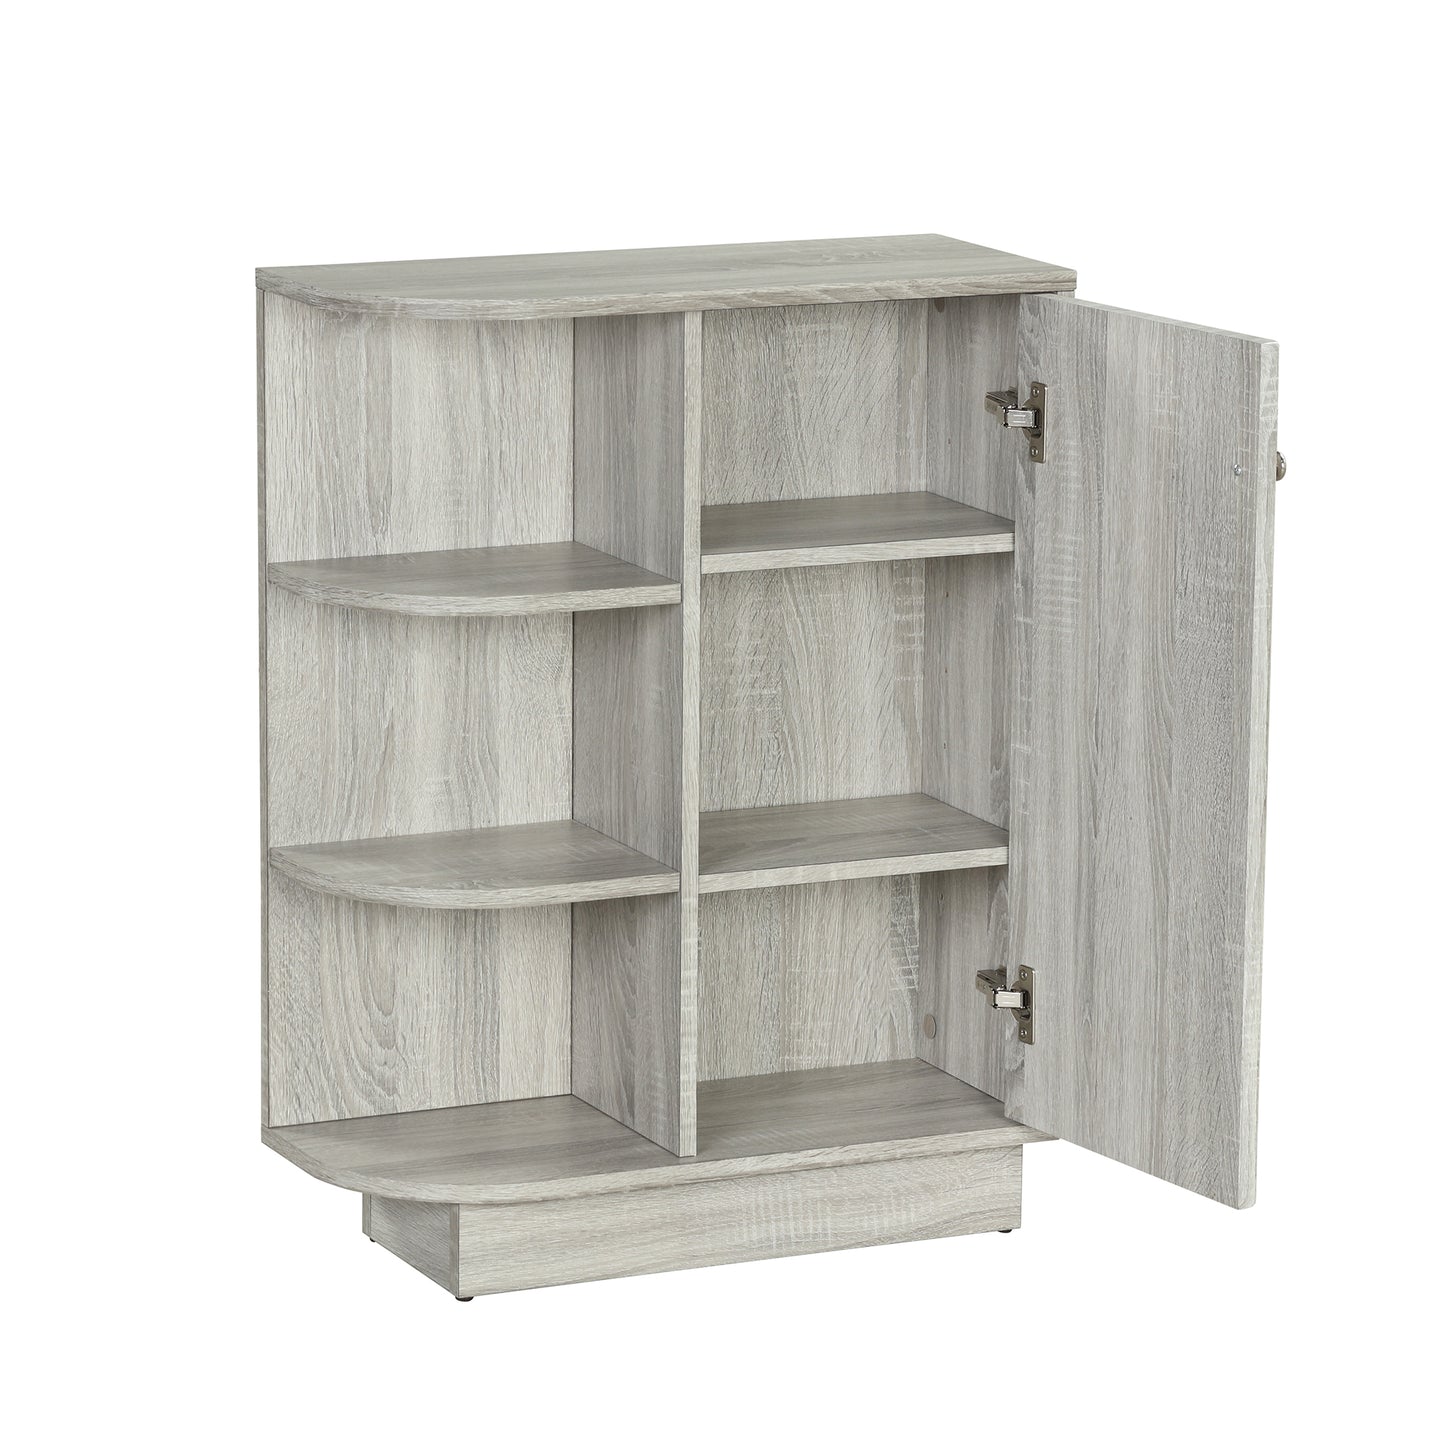 Open Style Shelf Cabinet with Adjustable Plates Ample Storage Space Easy to Assemble, Oak